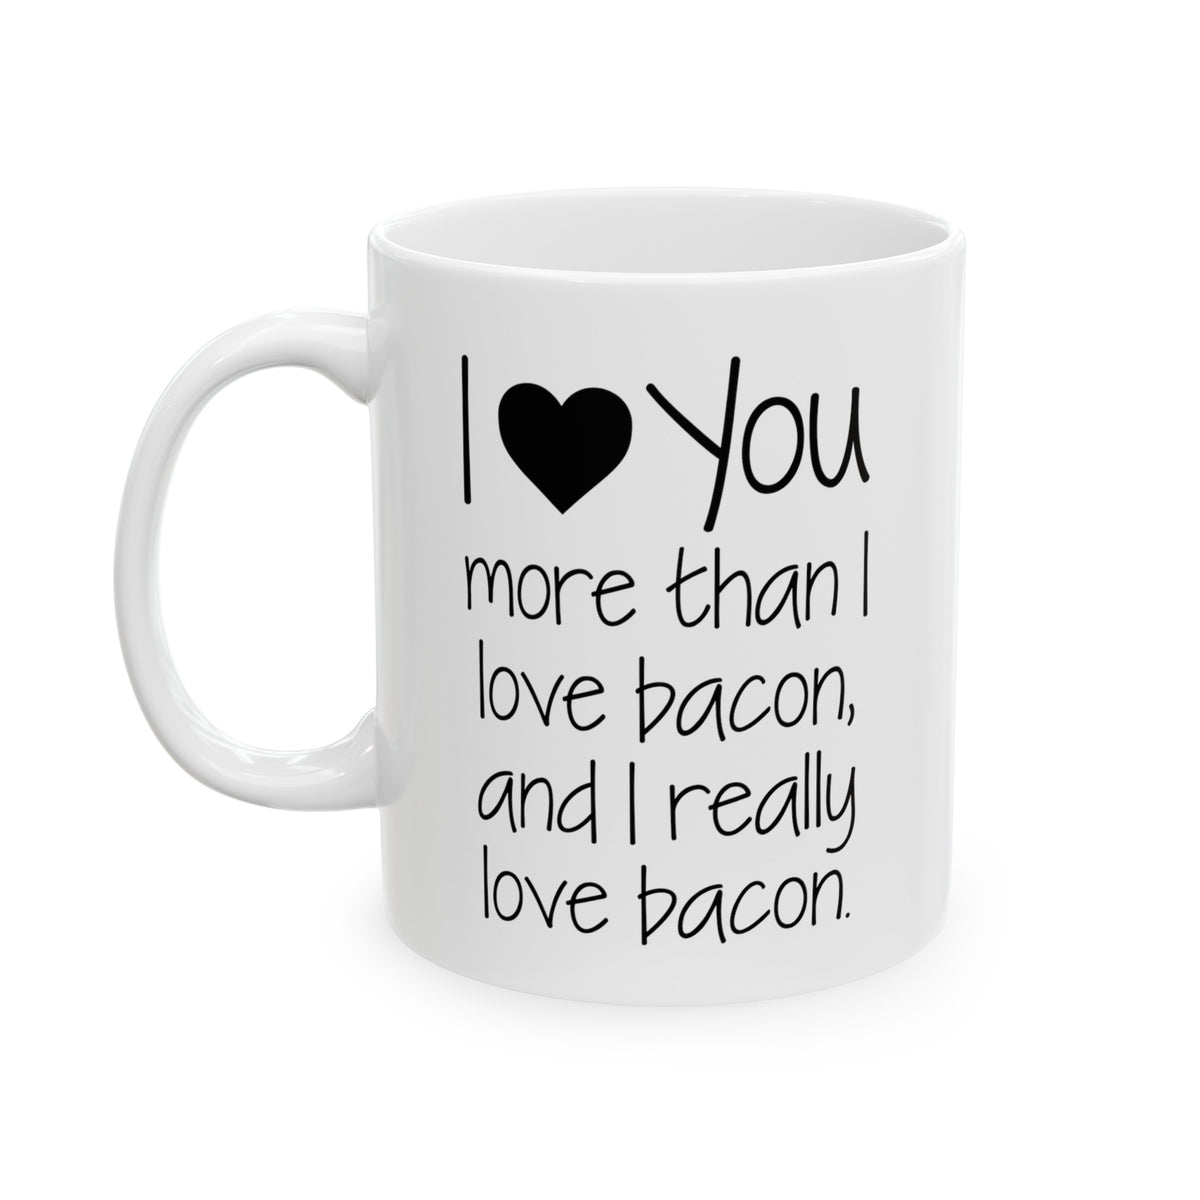 Funny Valentine's Day Love Coffee Mug - I love you more than I love bacon - Gift For Husband Wife Men Women